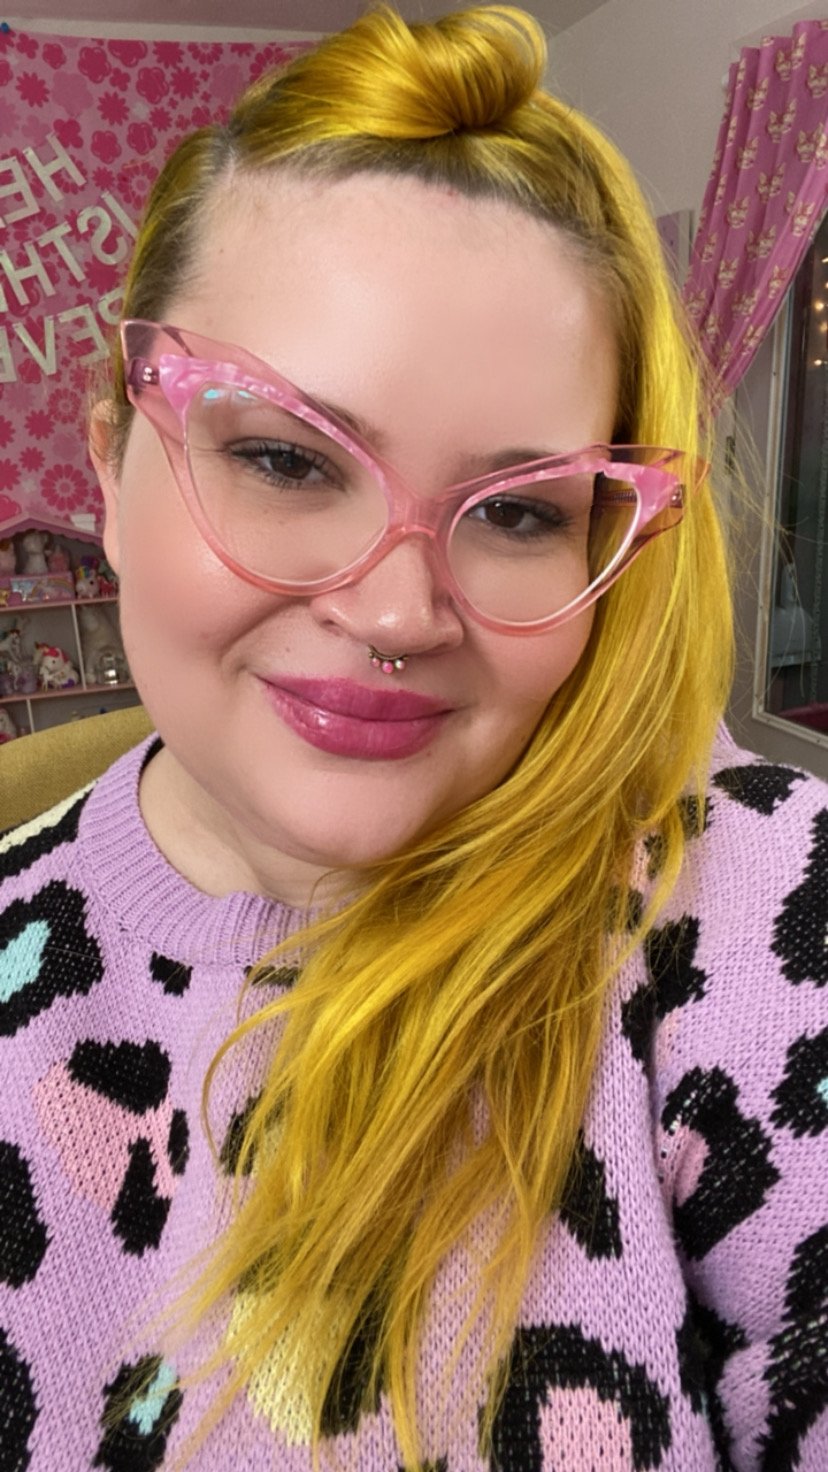 Caucasian person with pink rimmed glasses, high pony tail, blond hair, and purple sweater with leopard print pattern